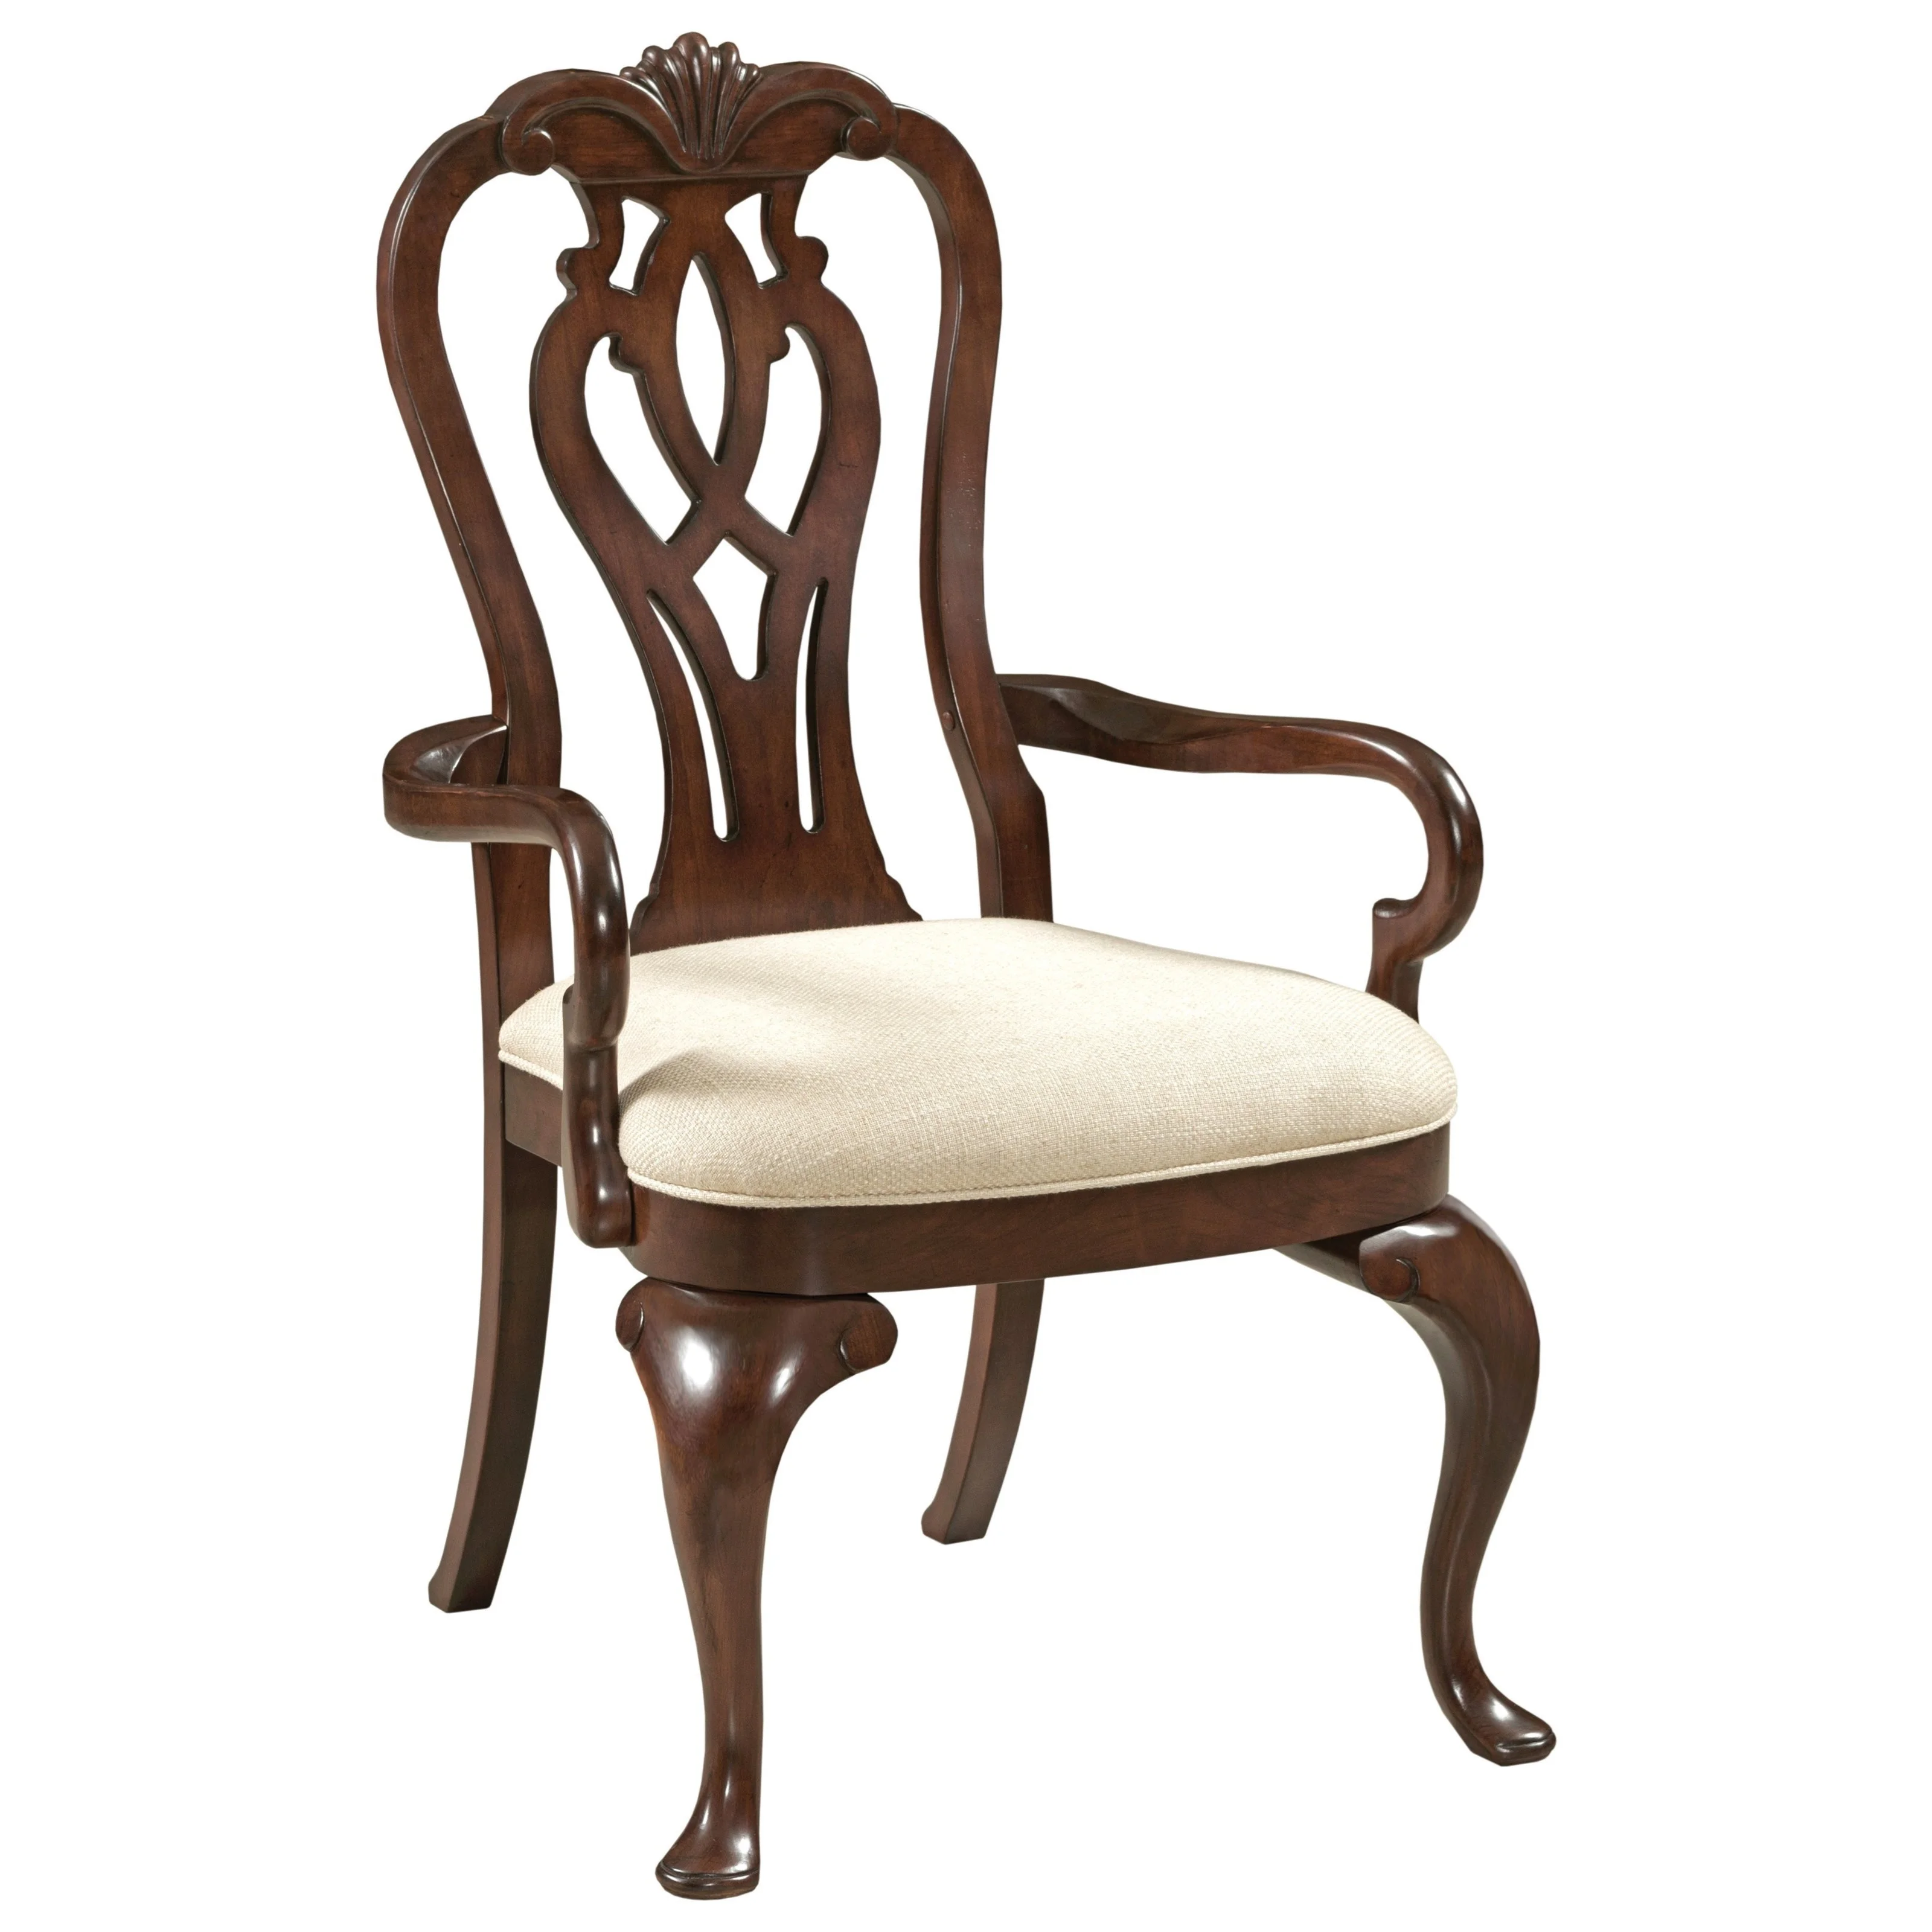 king queen chairs Archives - DST International